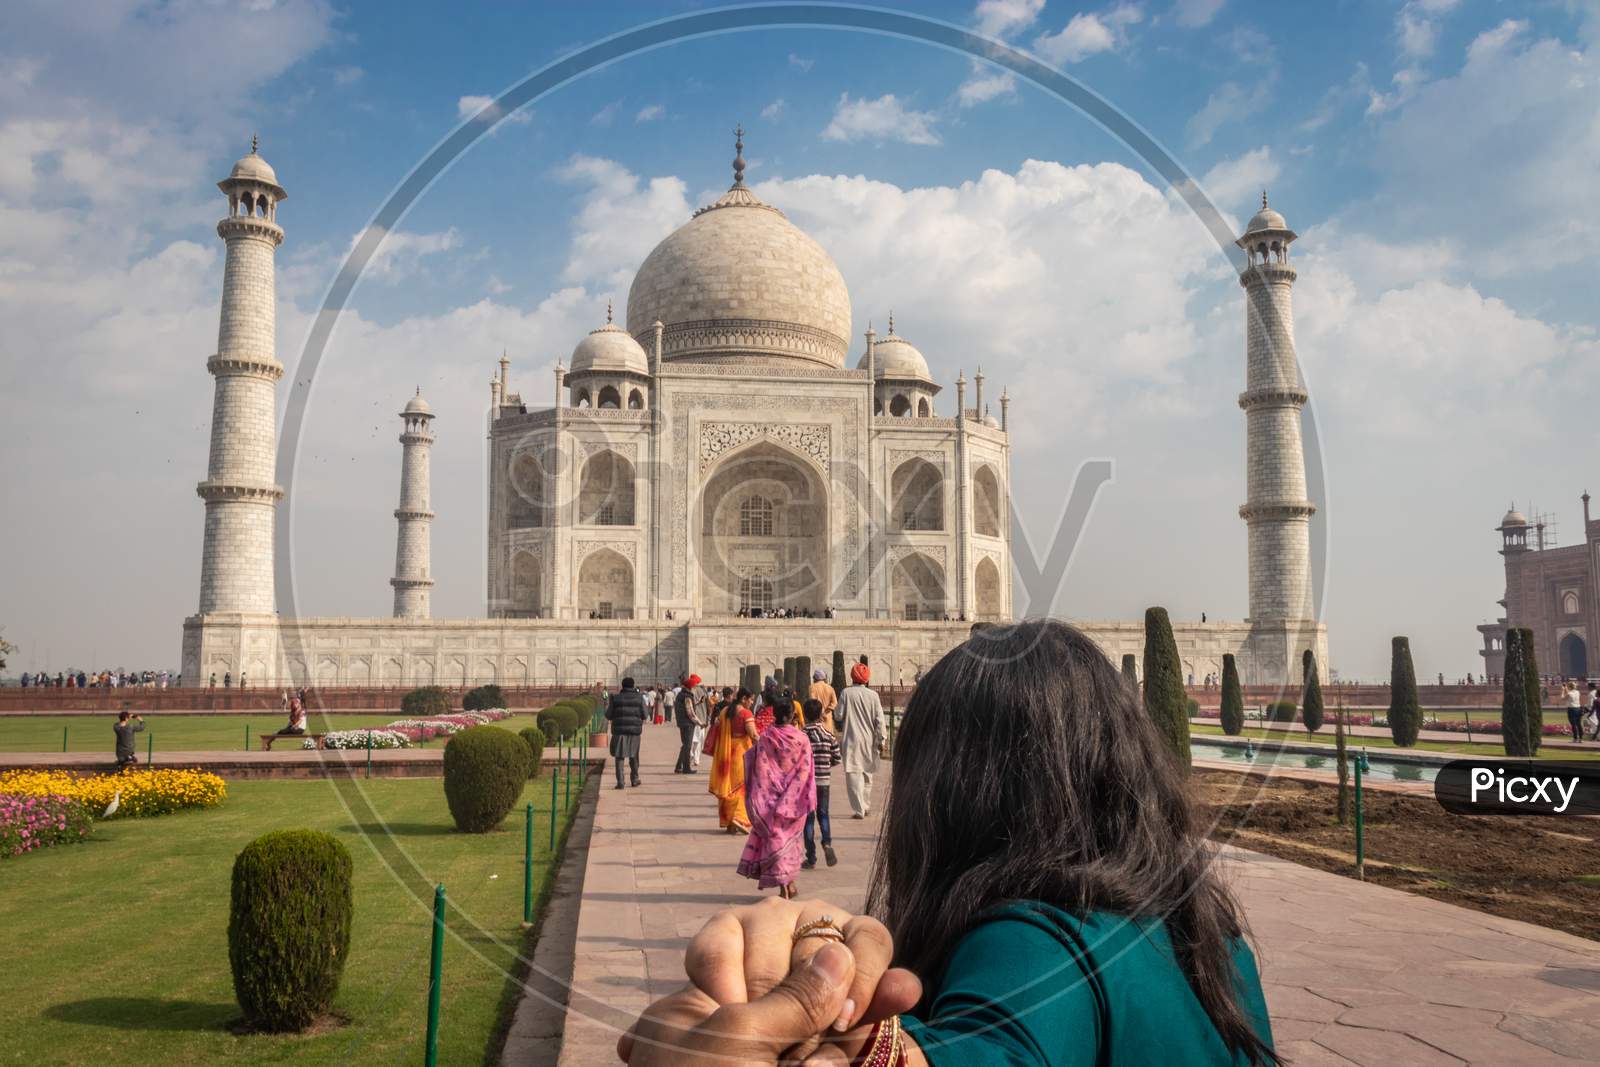 Couple At The Tajmahal The Symbol Of Love And The Seven Wonders Of The World